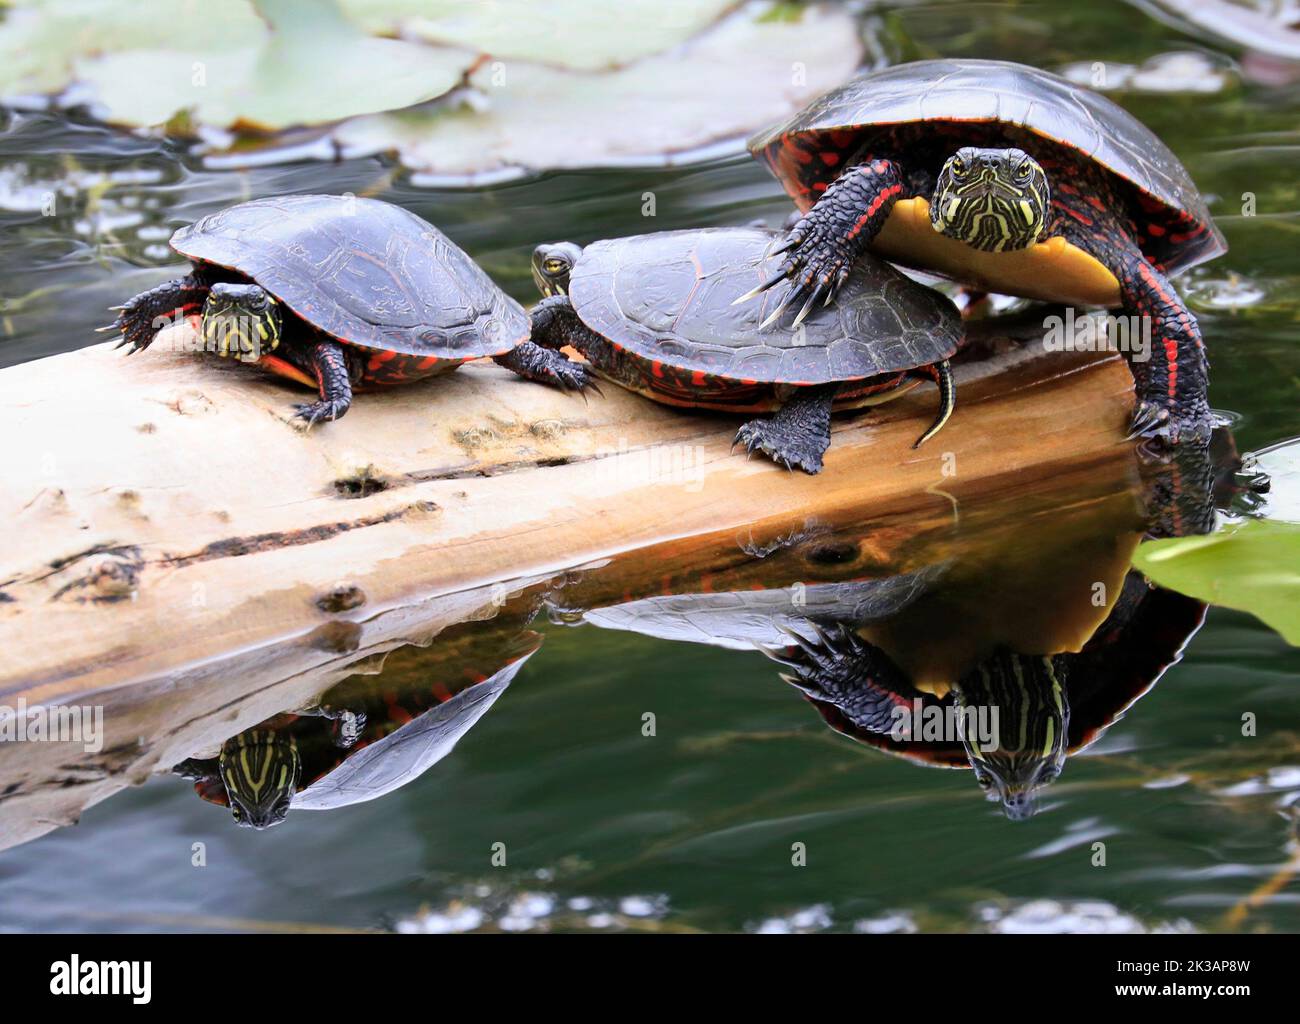 Pair of Painted Turtles (Chrysemys picta marginata) with their Reflection in the Water, Montreal, Canada Stock Photo